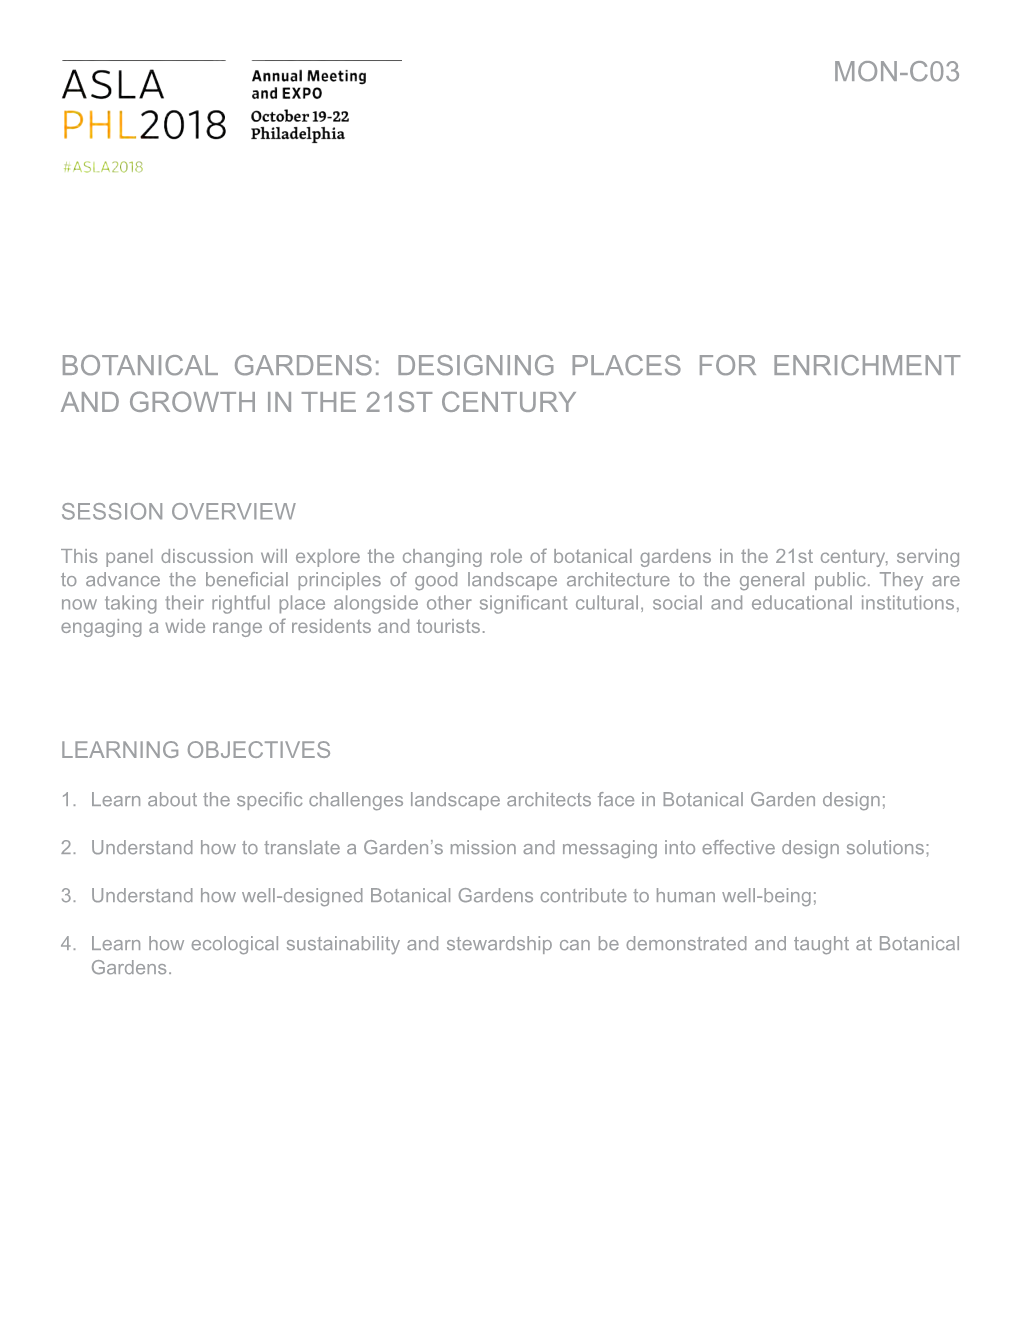 Botanical Gardens: Designing Places for Enrichment and Growth in the 21St Century